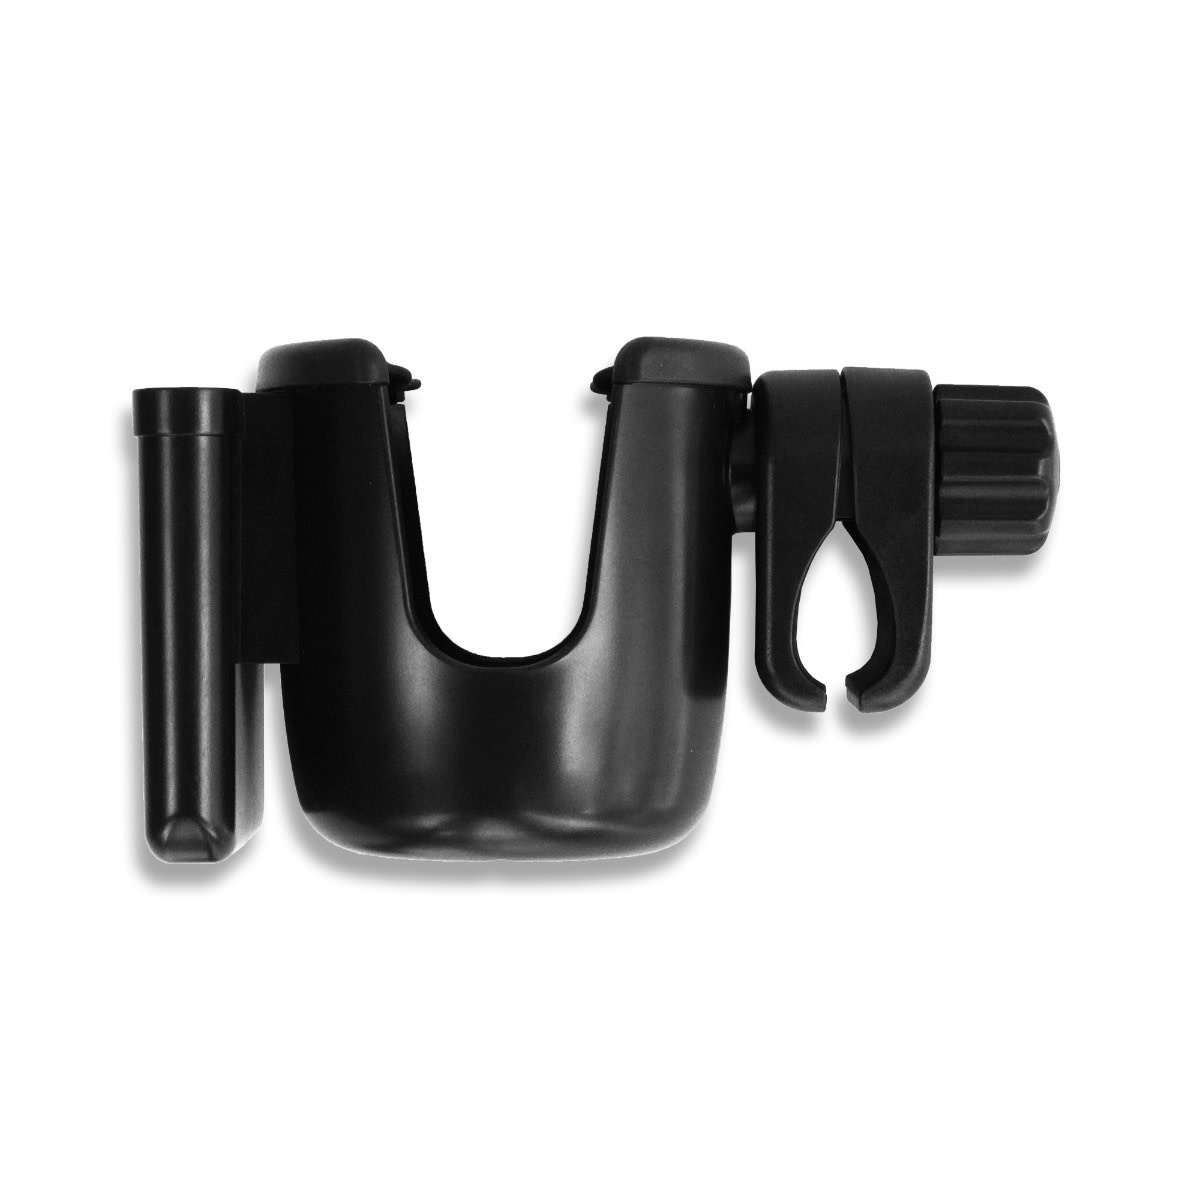 Wonderfold Wonderfold - 2 in 1 Cup & Phone Holder (fits all wagons)